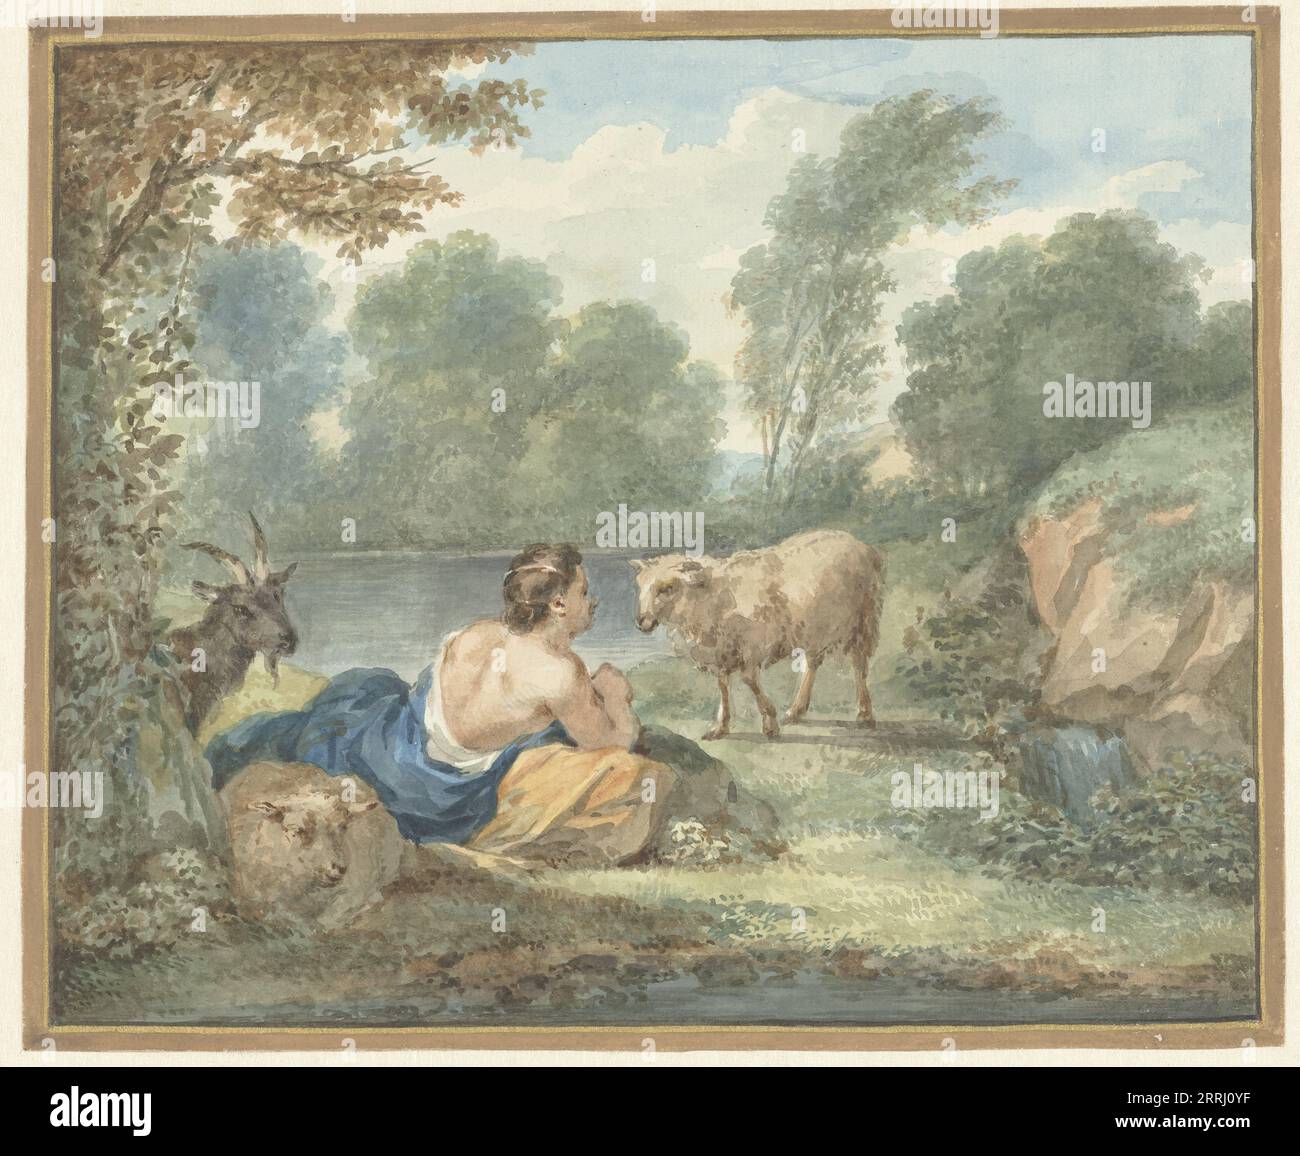 Shepherd with sheep in a landscape with a lake, 1781. Stock Photo